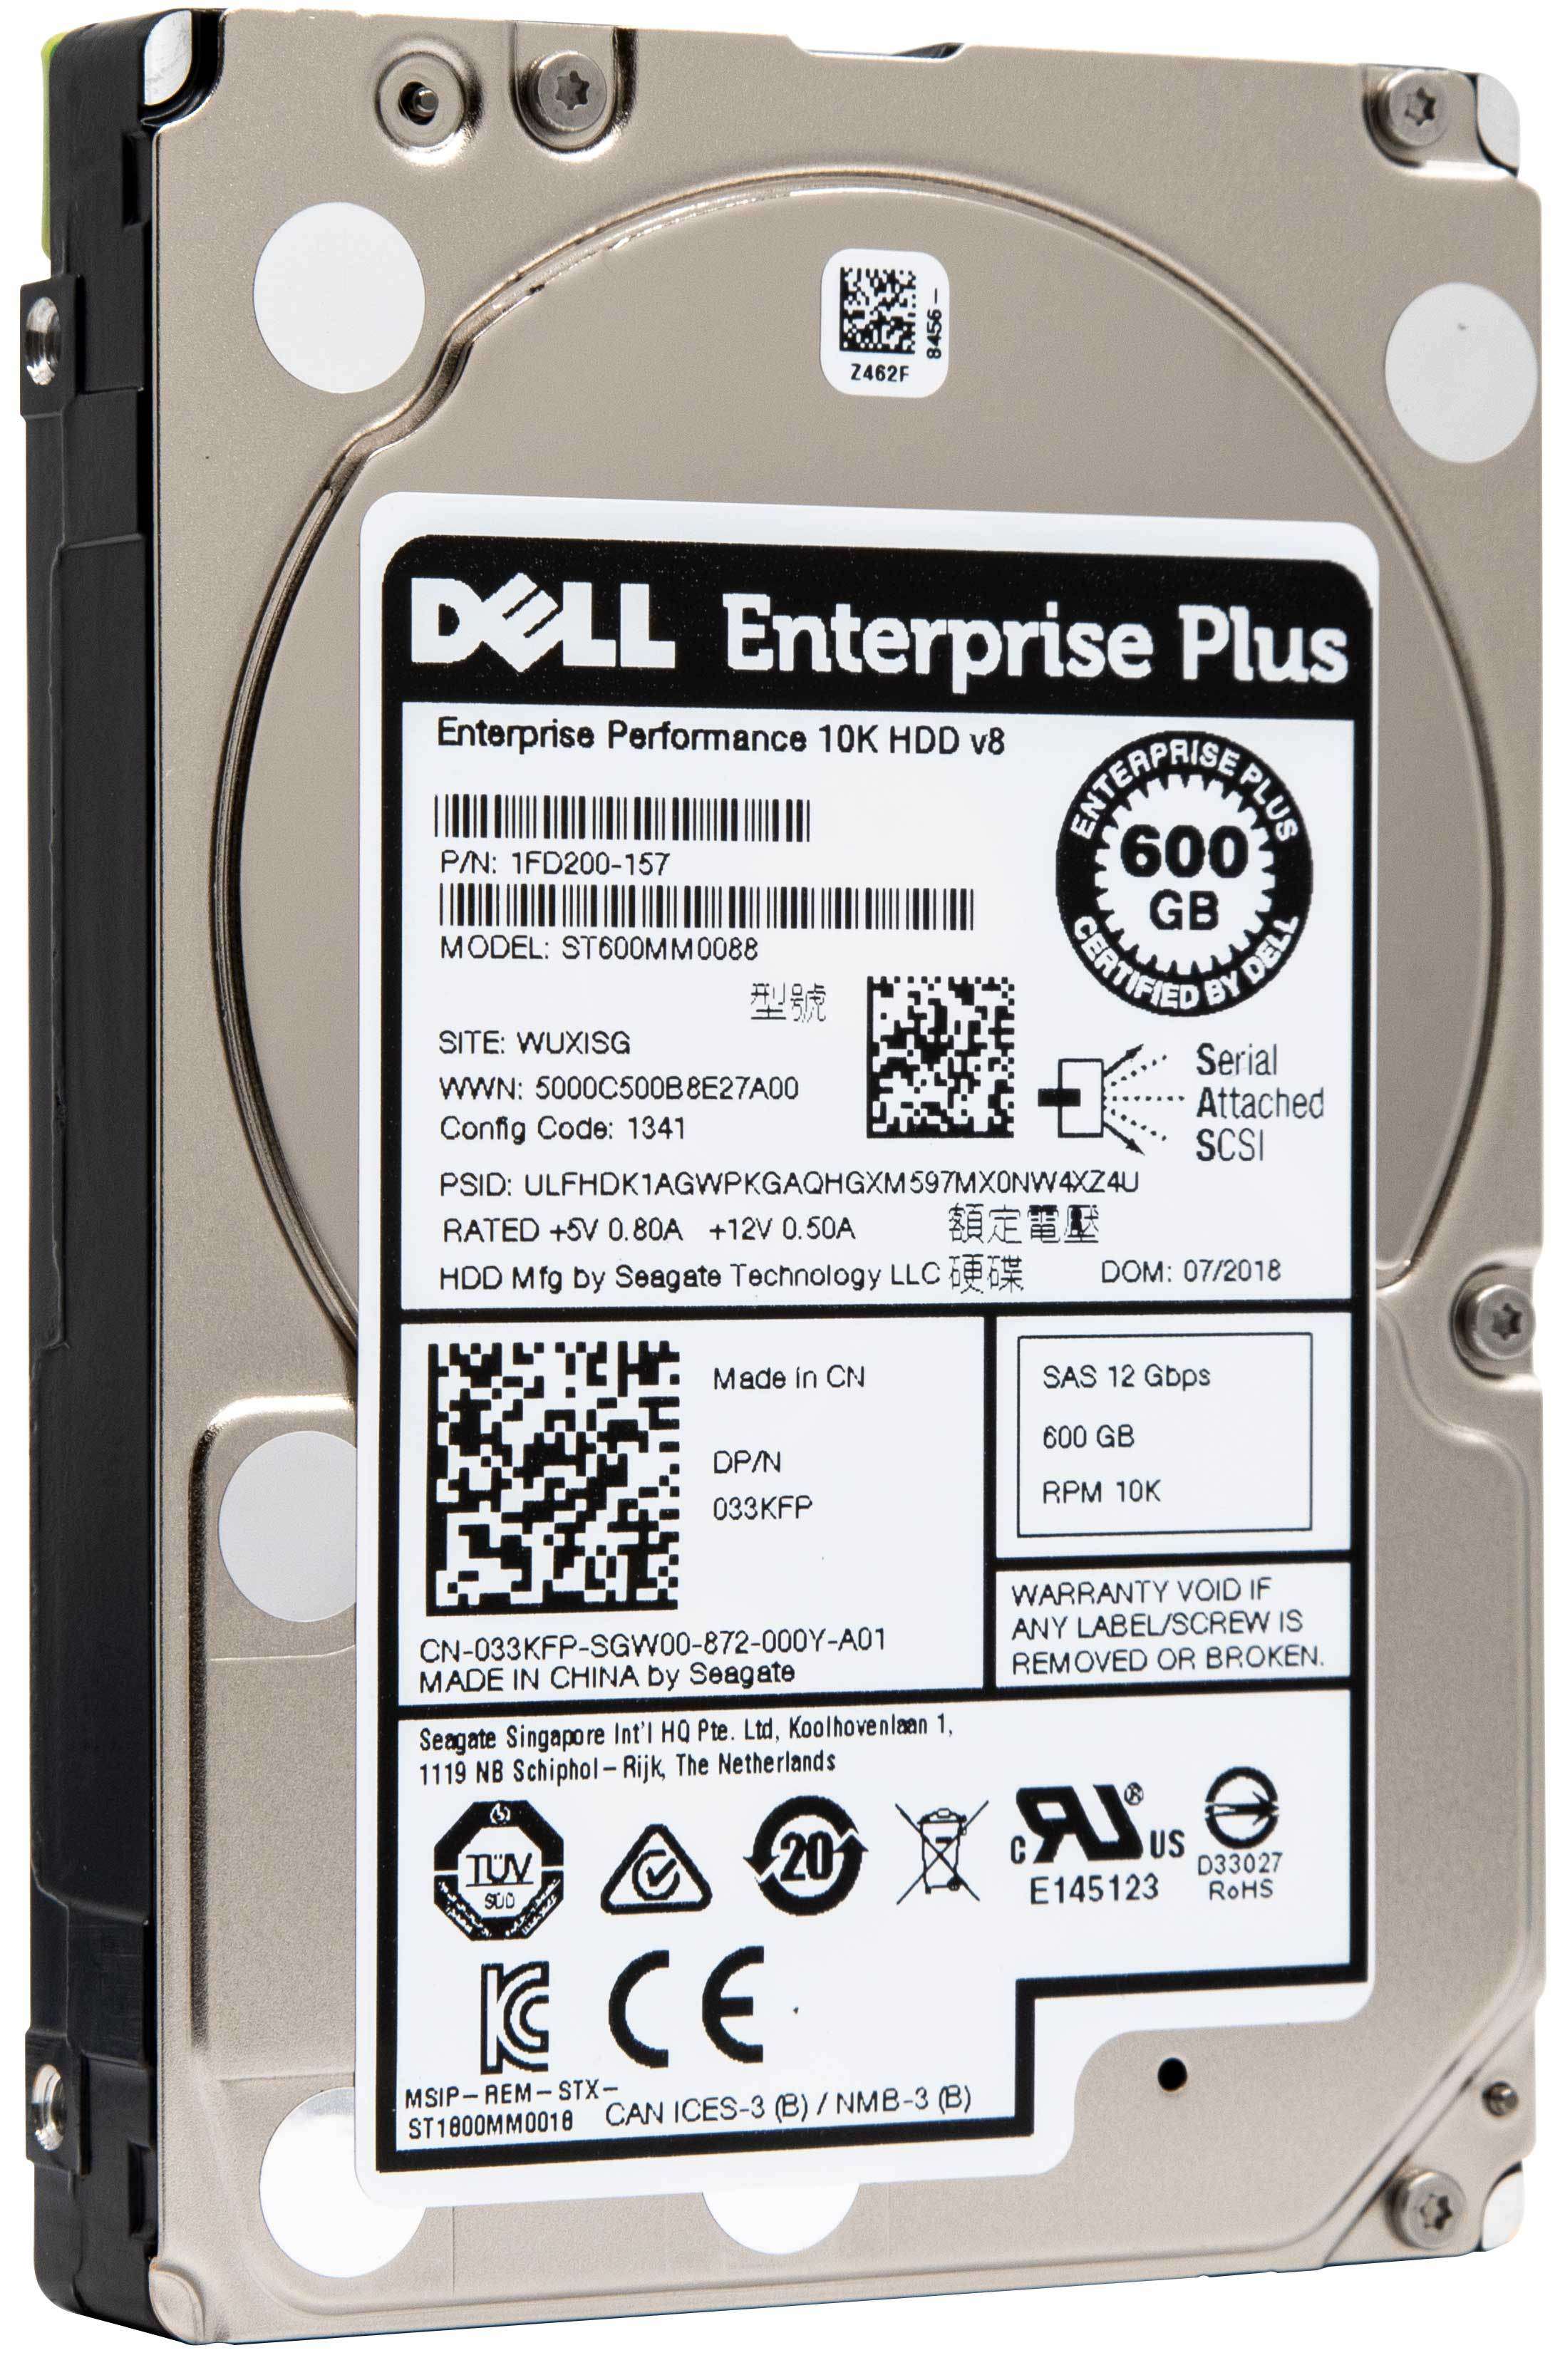 Dell 33KFP 600GB 10K RPM SAS 12Gb/s 2.5" Manufacturer Recertified HDD